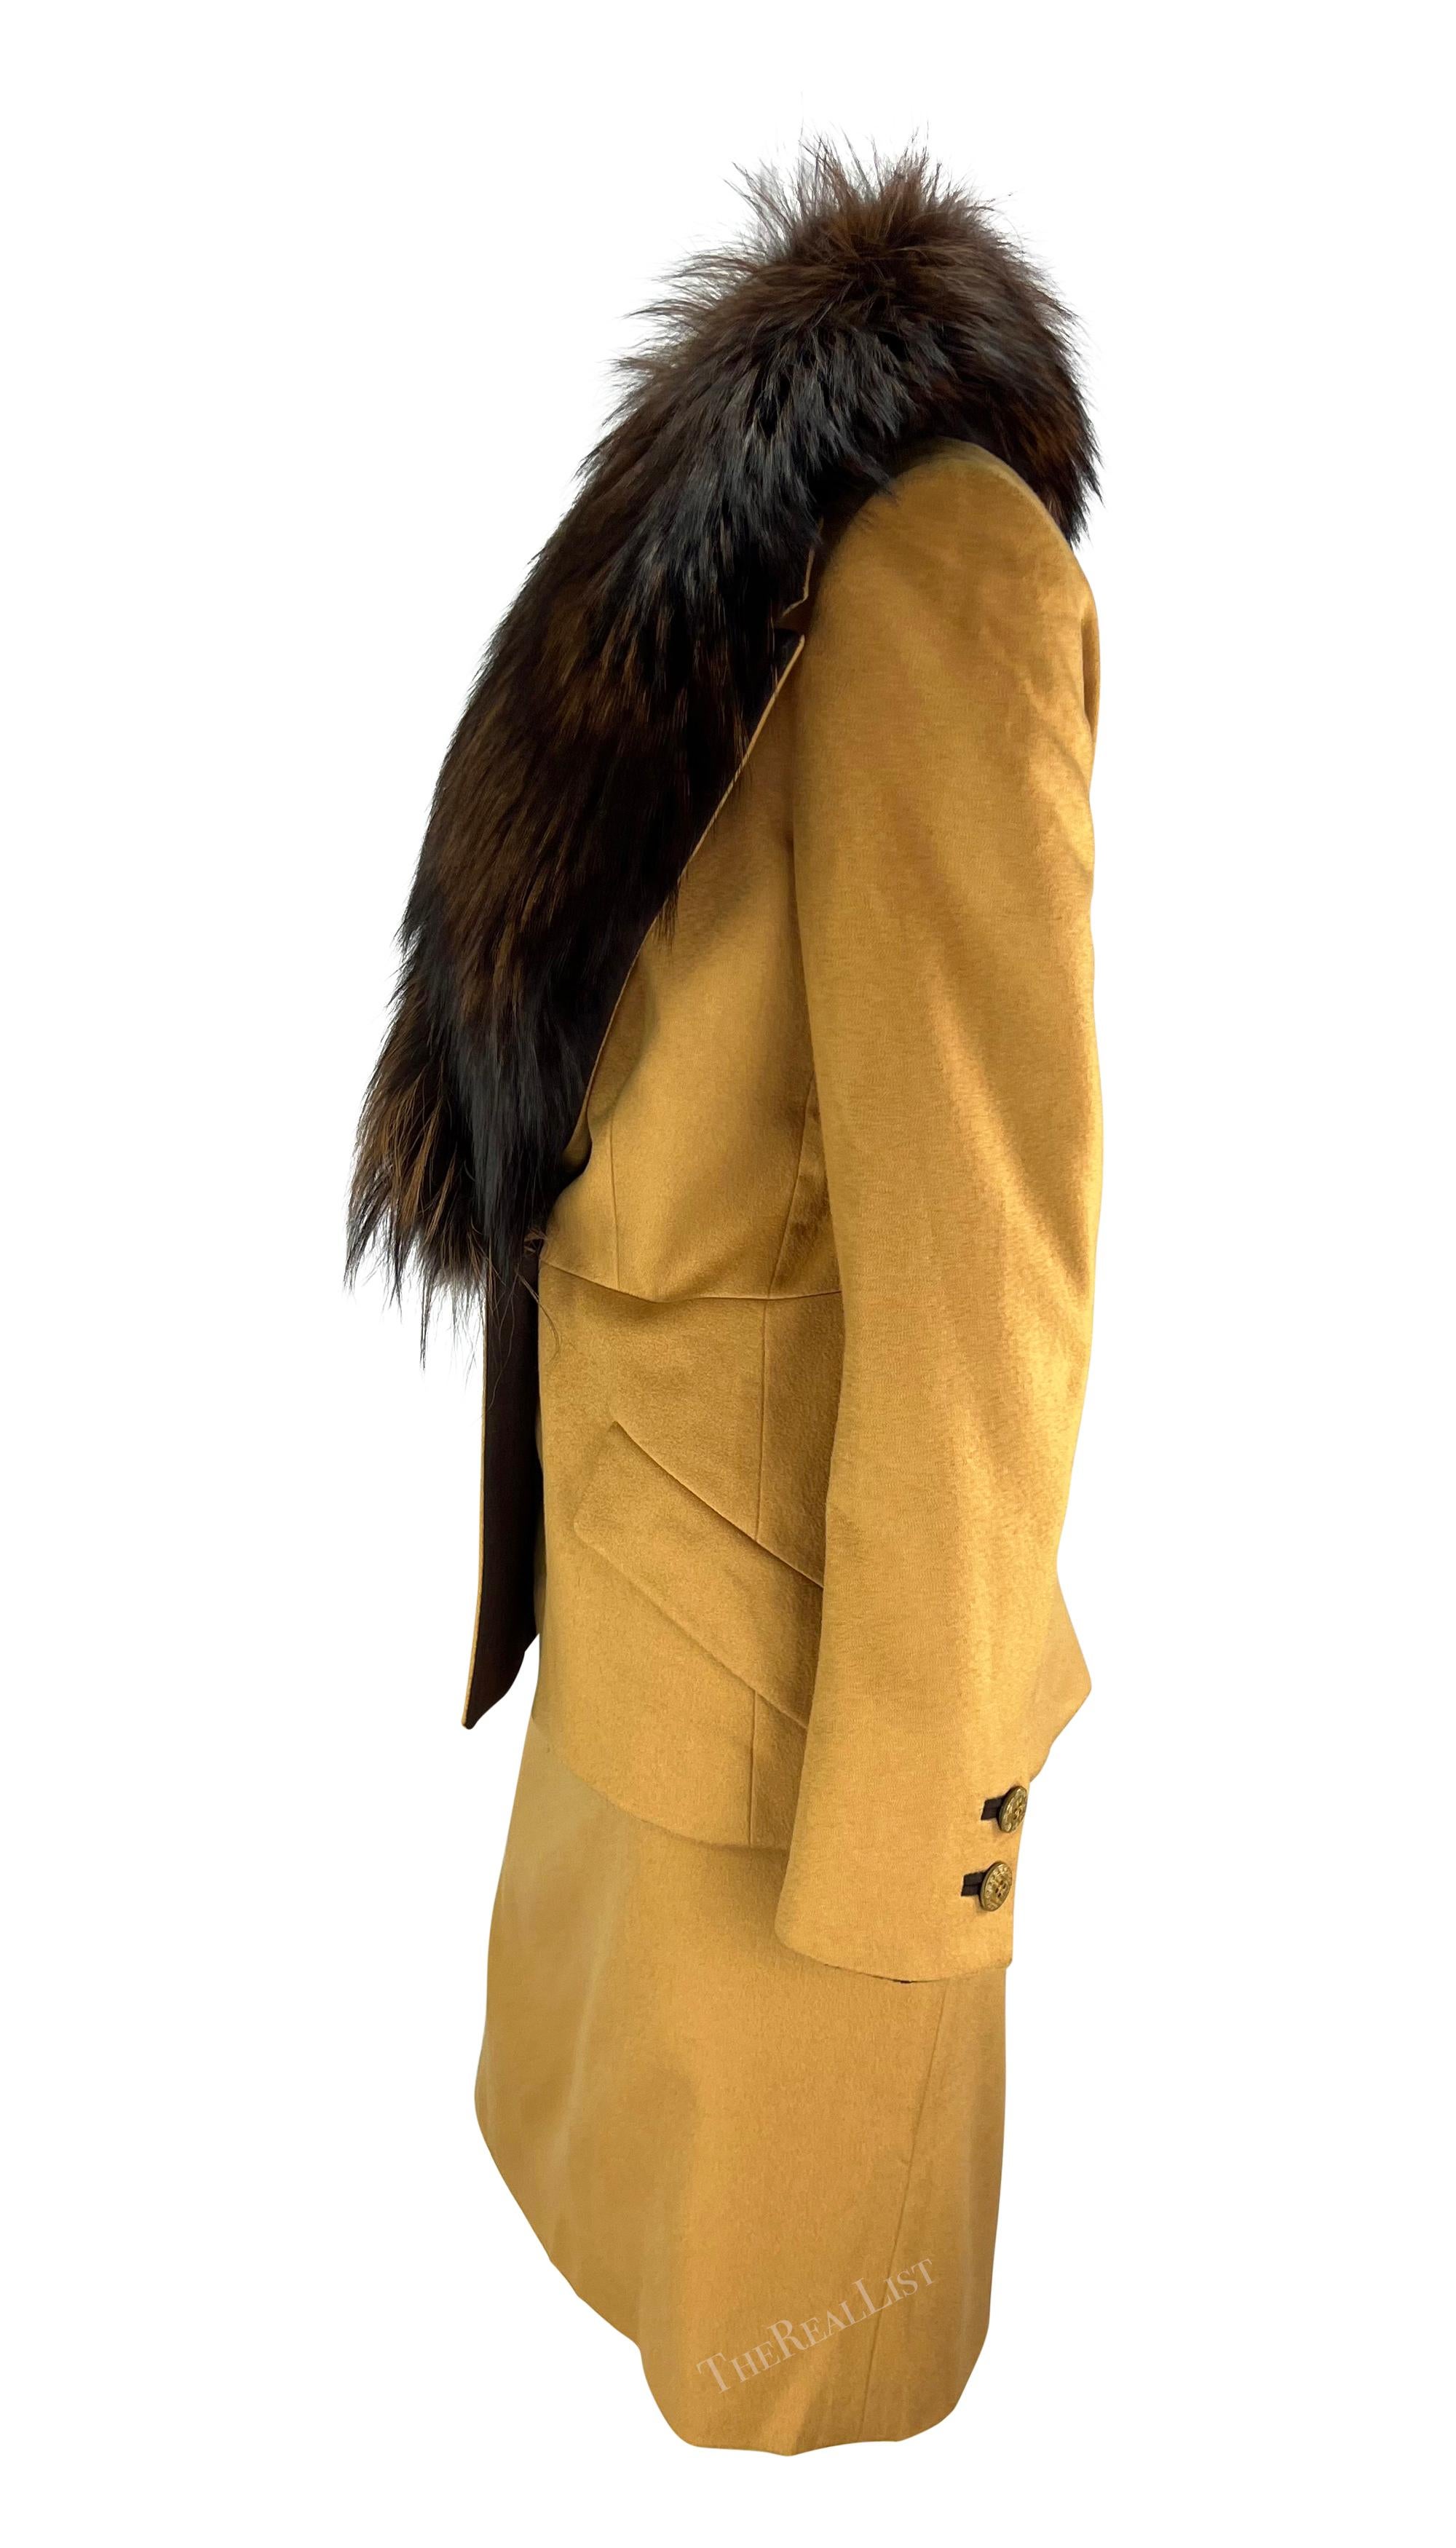 F/W 1997 Gianni Versace Couture Mustard Fox Fur Trim Wool Skirt Suit In Excellent Condition For Sale In West Hollywood, CA